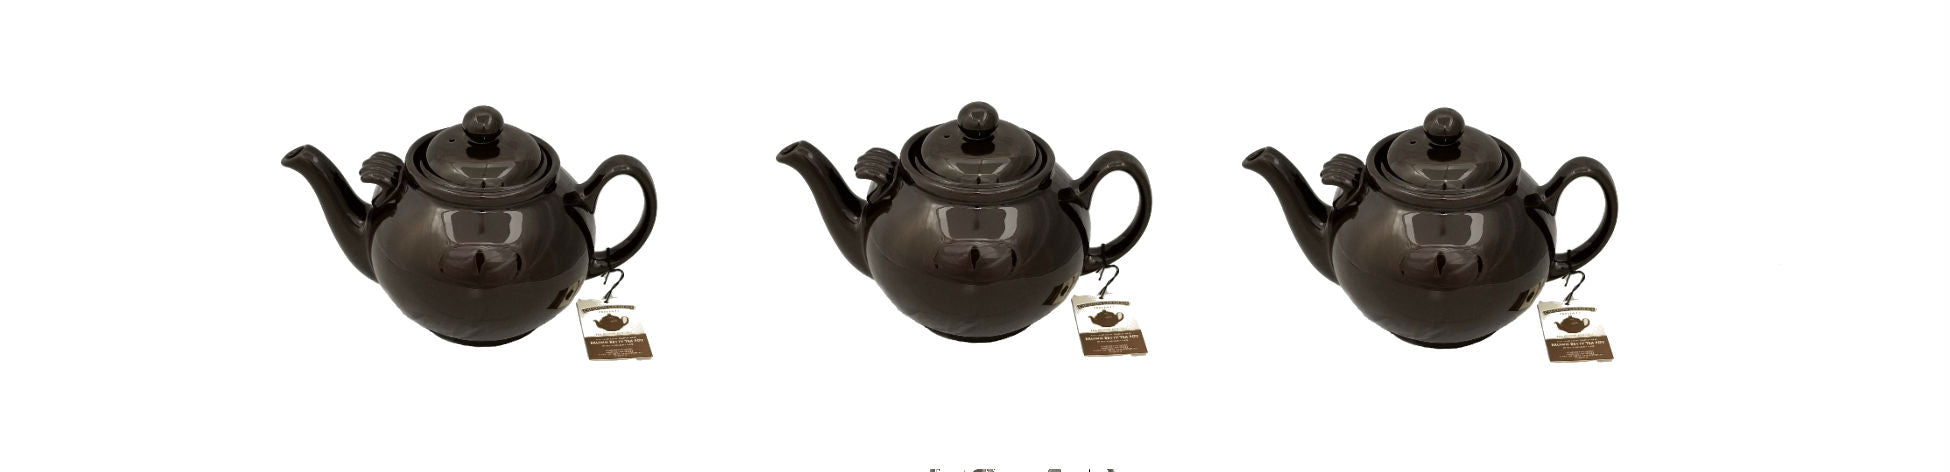  Cauldon Ceramics Classic Brown Betty Tea Pot, Hand Made 4 Cup  Brown Betty Teapot, Made with Traditional Staffordshire Red Clay